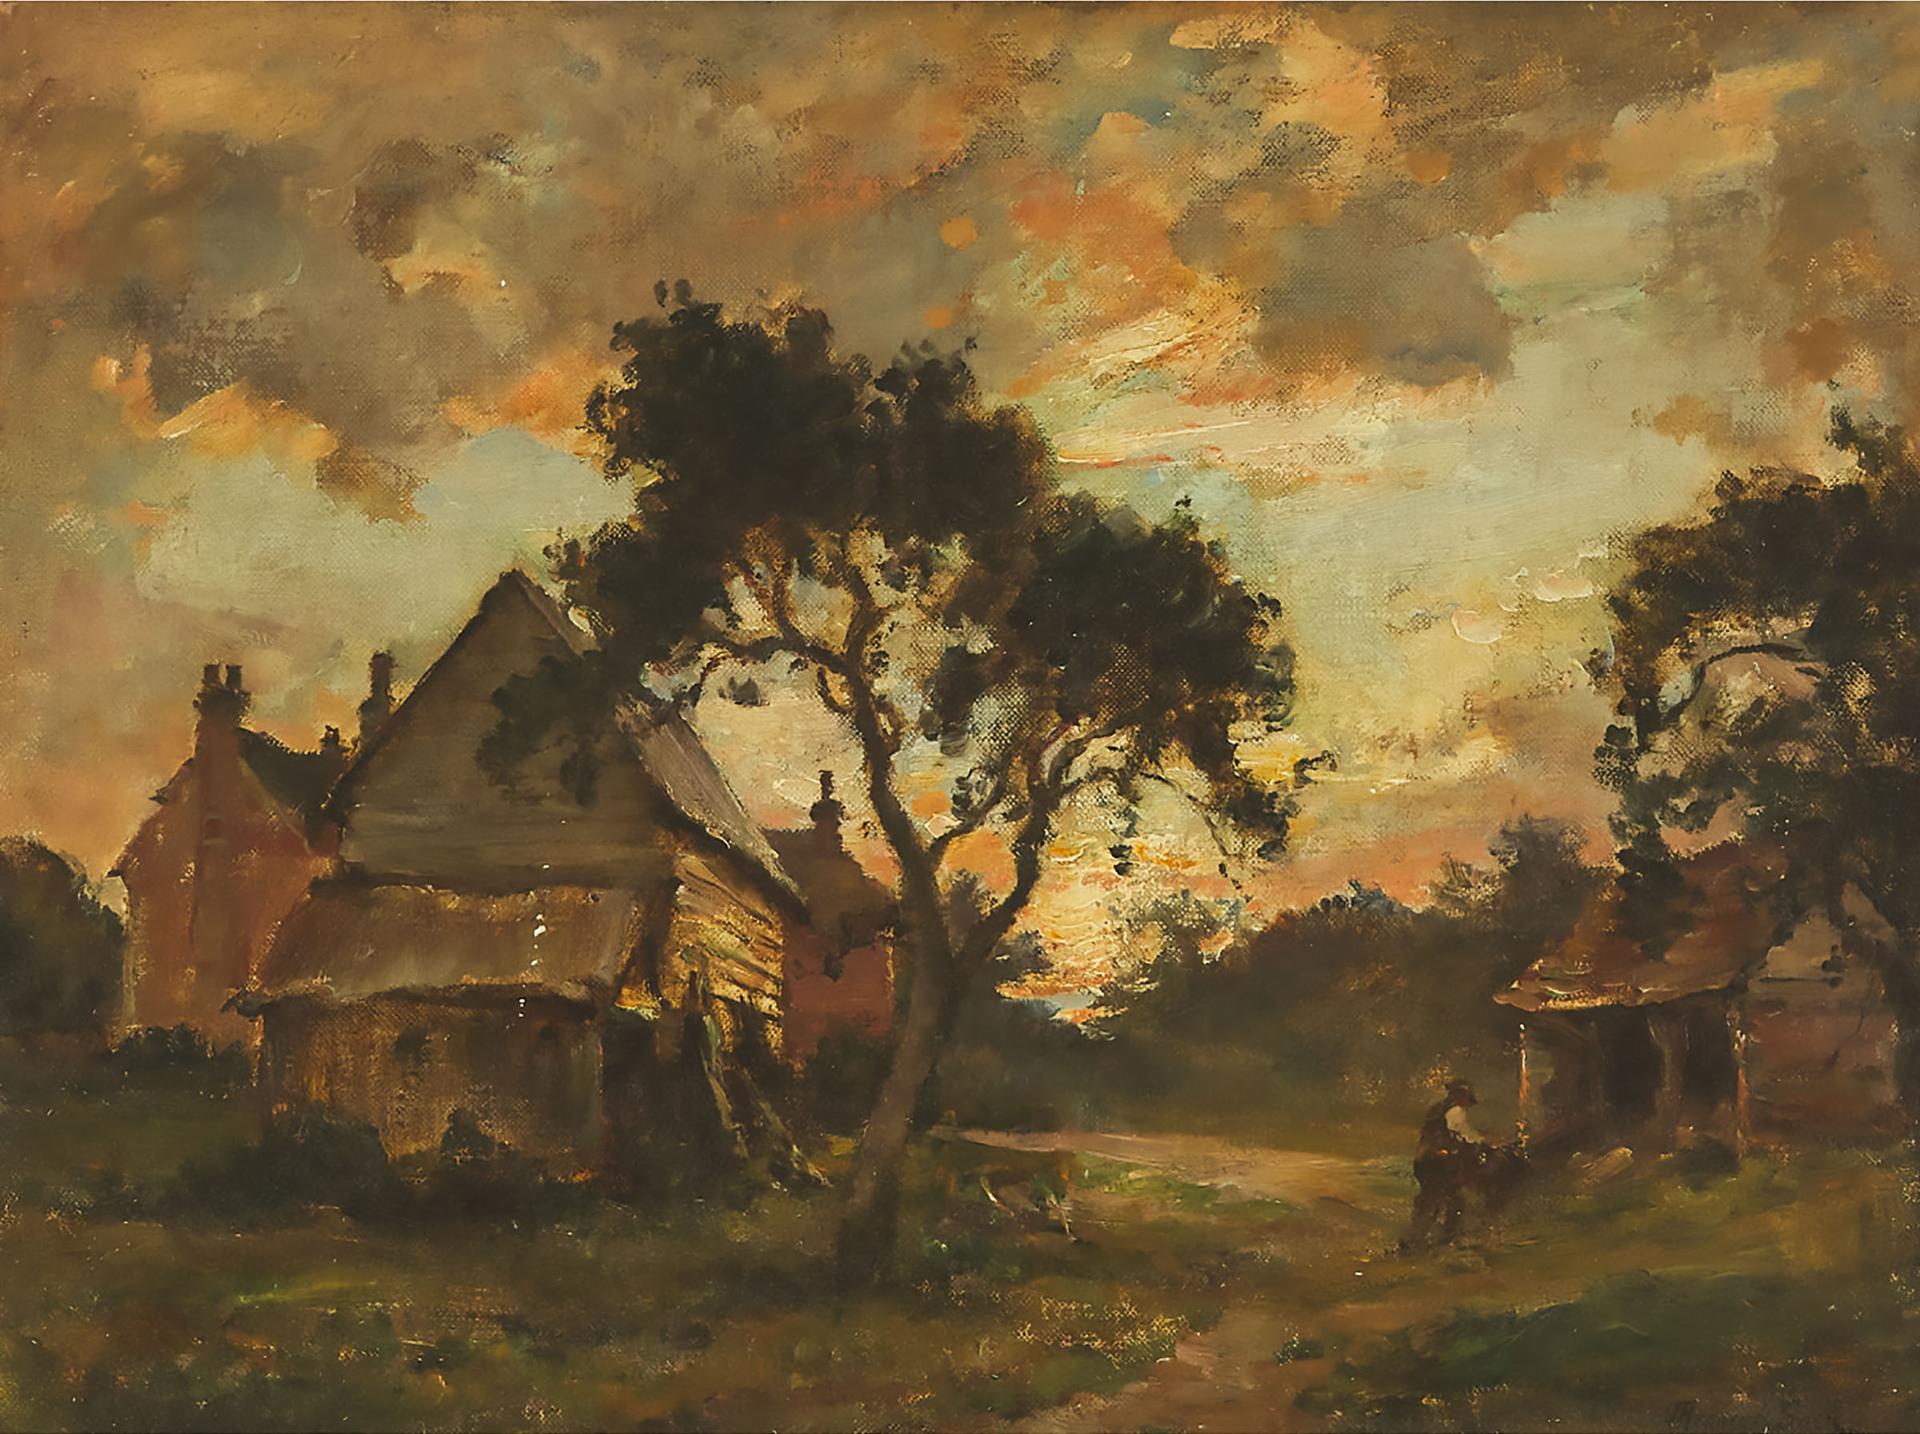 James Herbert Snell (1861-1935) - Farmers Working In The Farmyard At Sunset